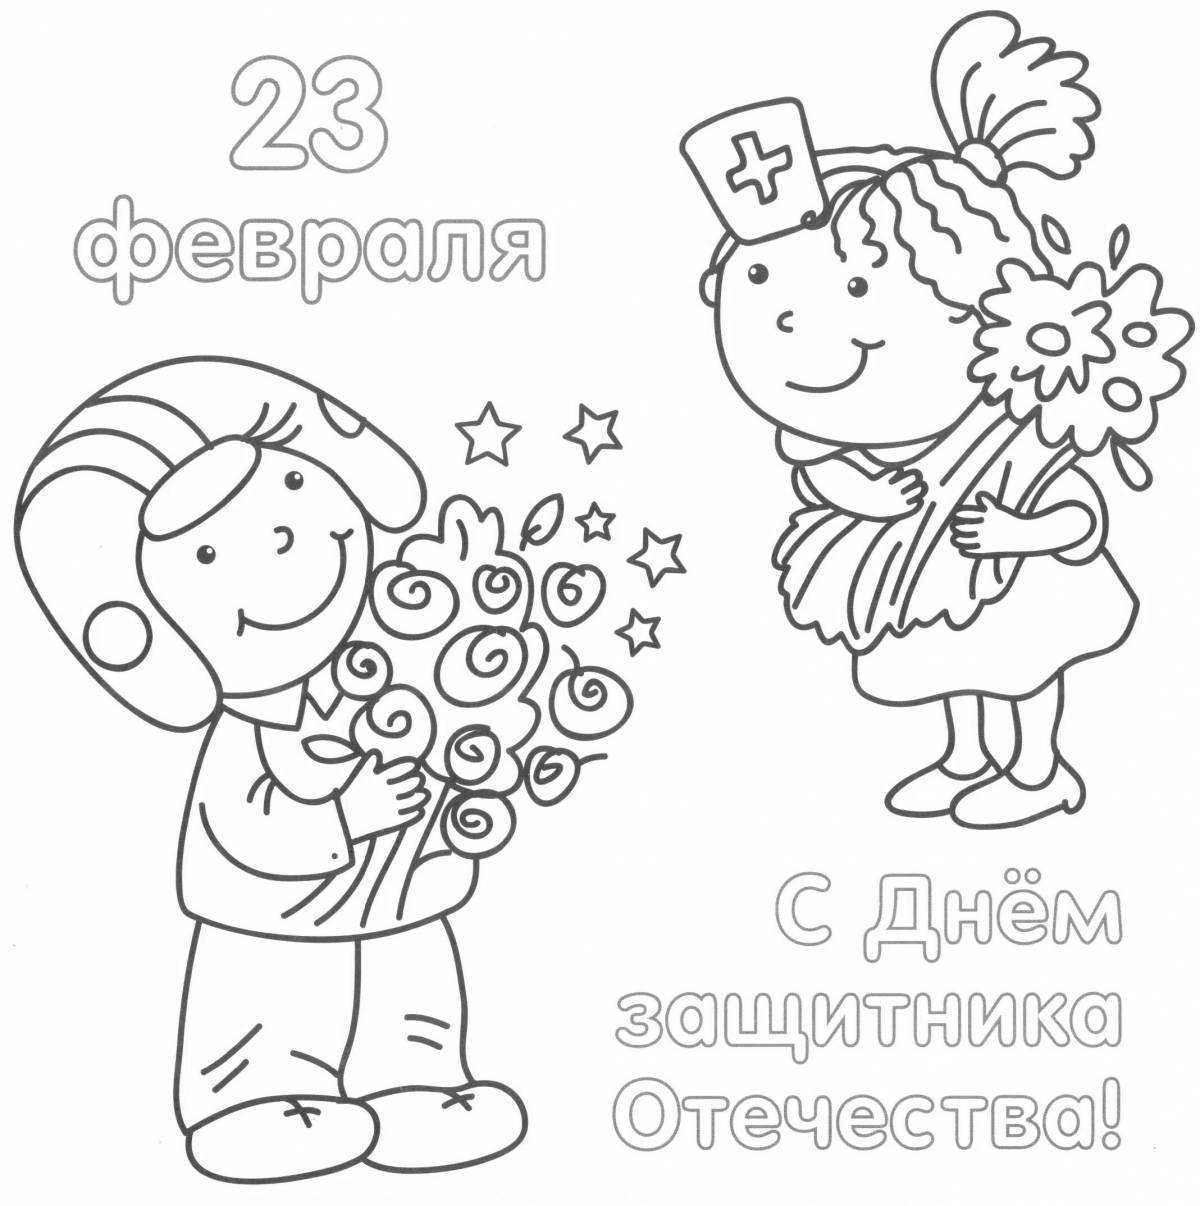 Sparkling coloring page 23